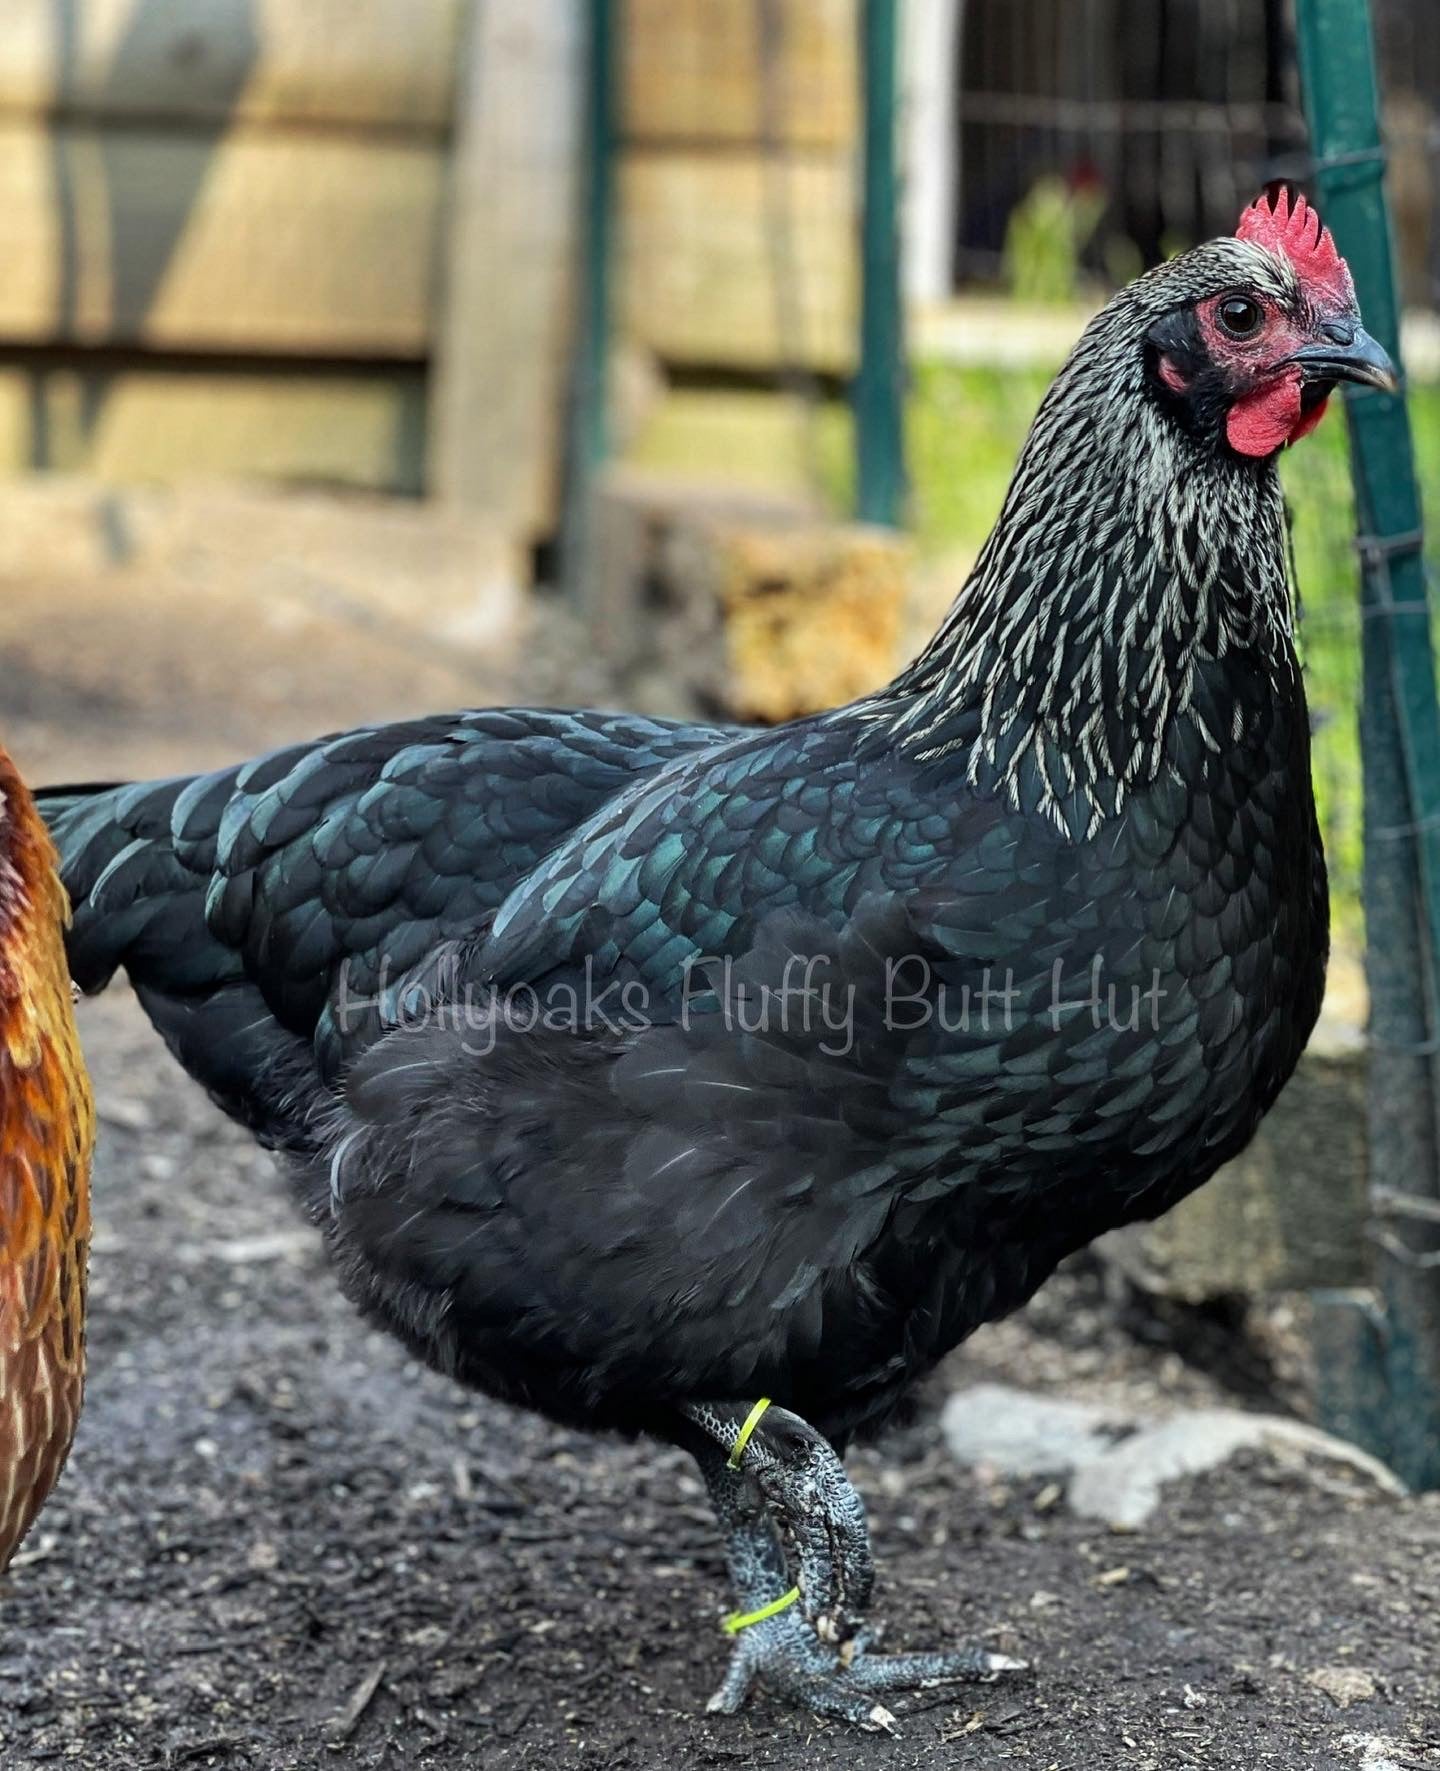 (6) F1 Olive Egger “Silverudd’s Exclusive” Hatching Eggs